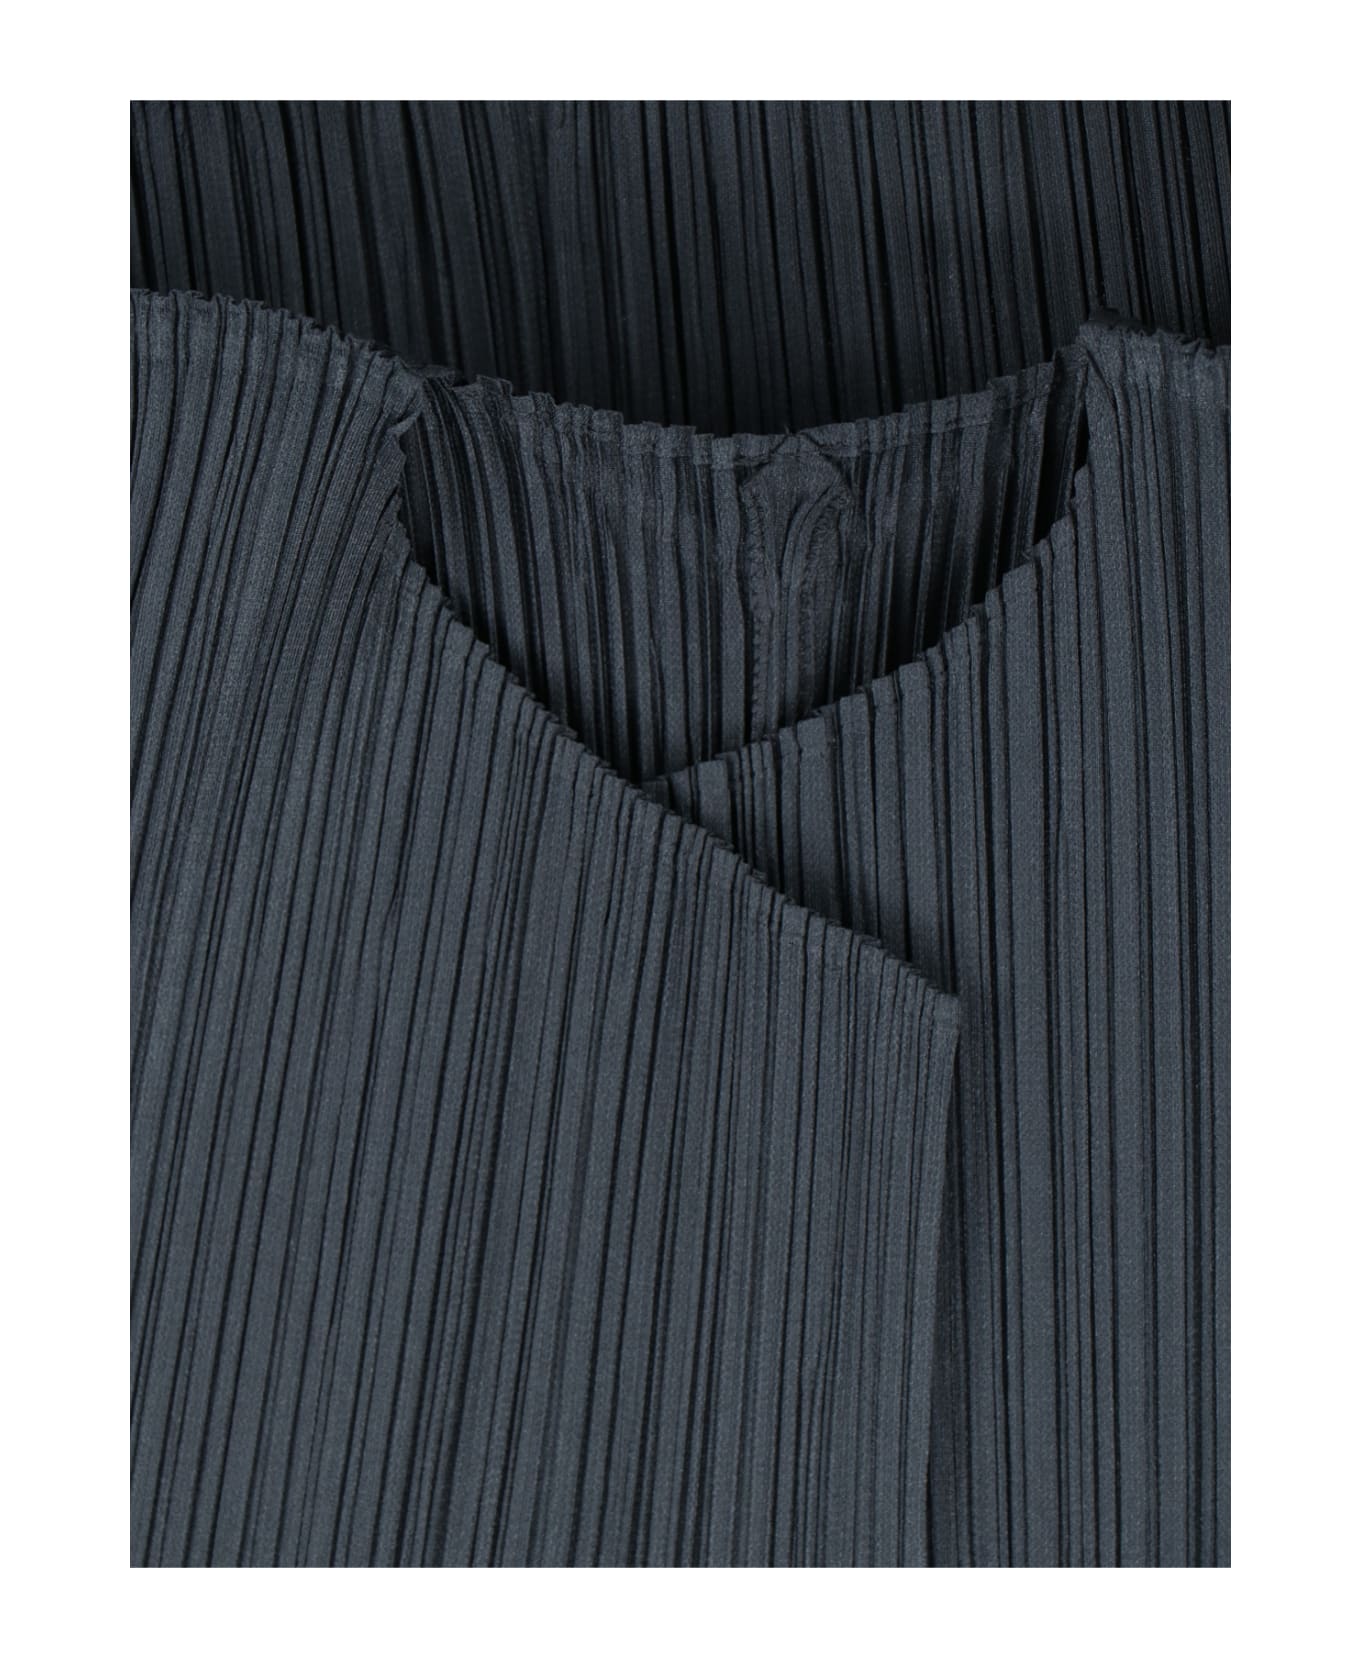 Pleats Please Issey Miyake Open Pleated Cardigan - Charcoal